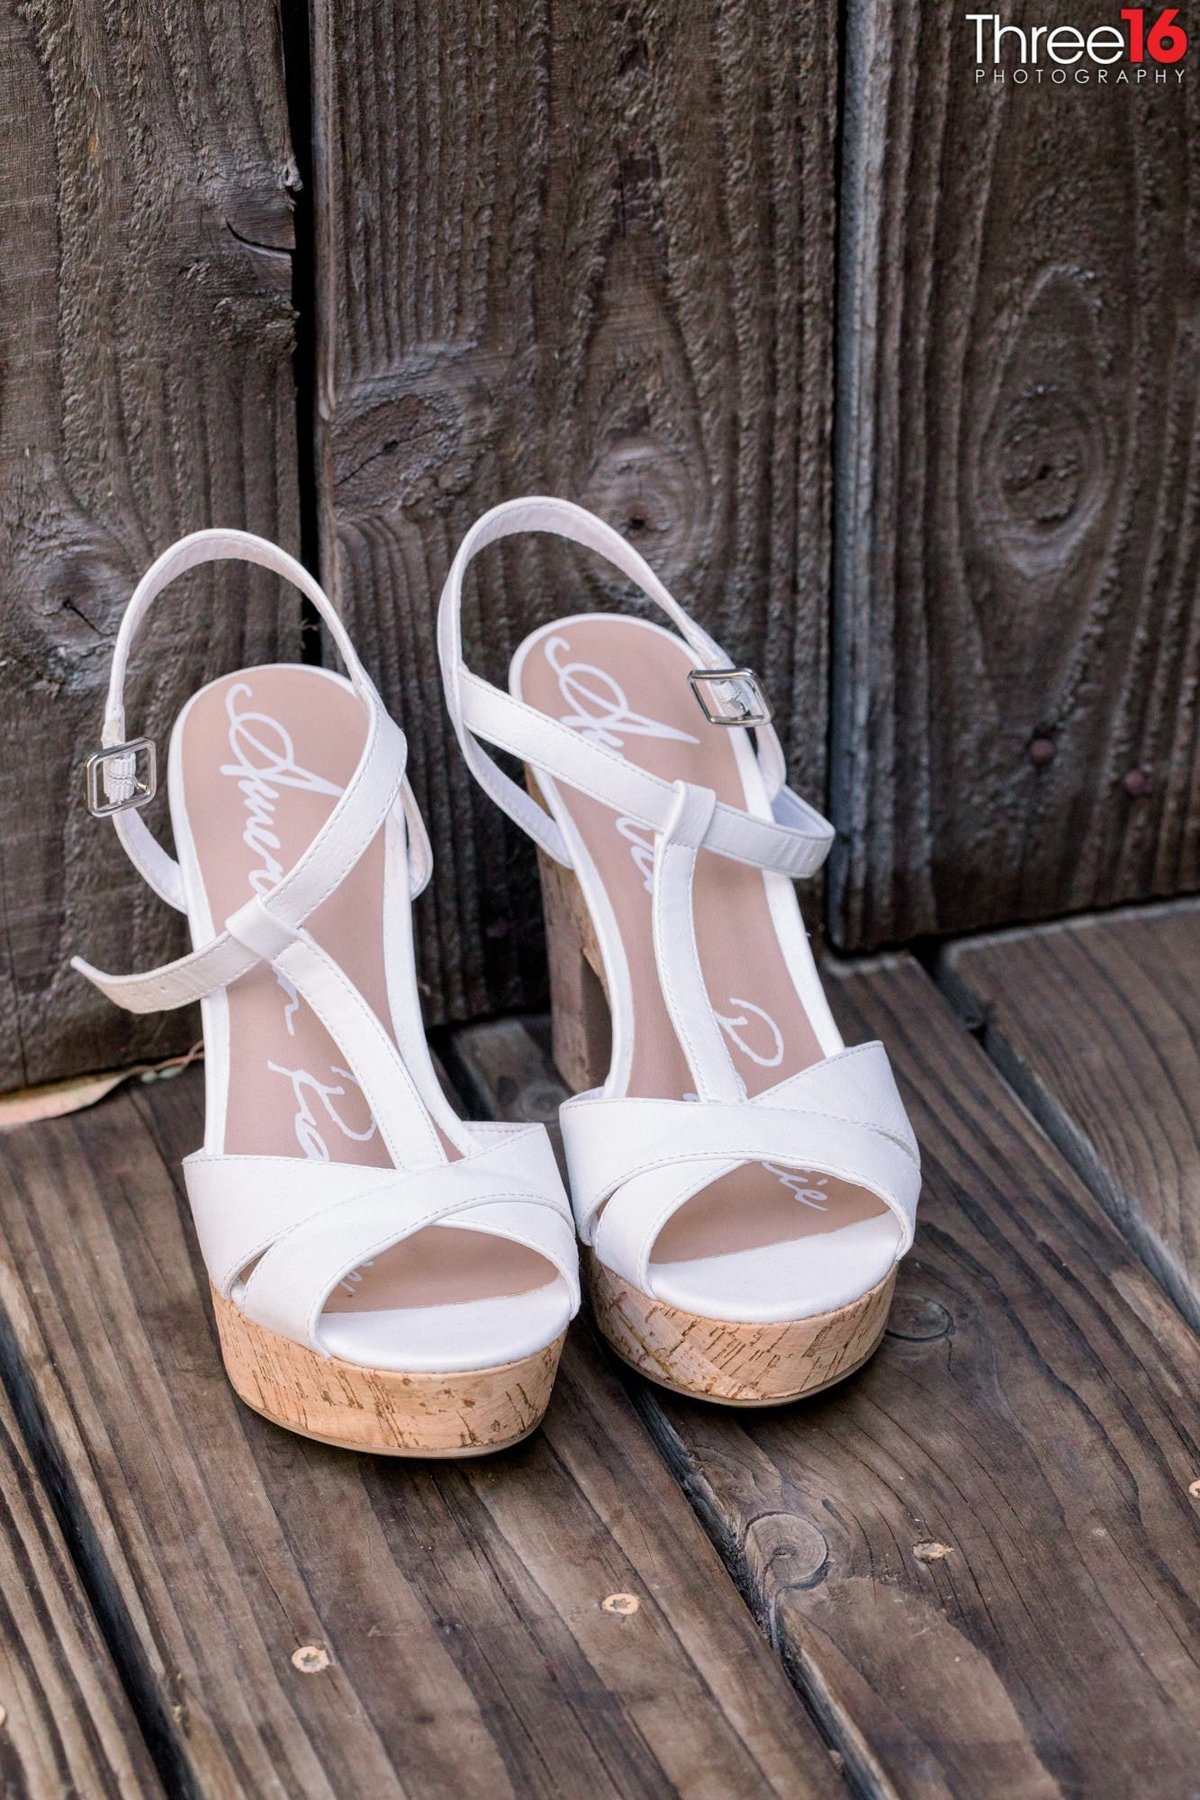 Brides wedding day shoes